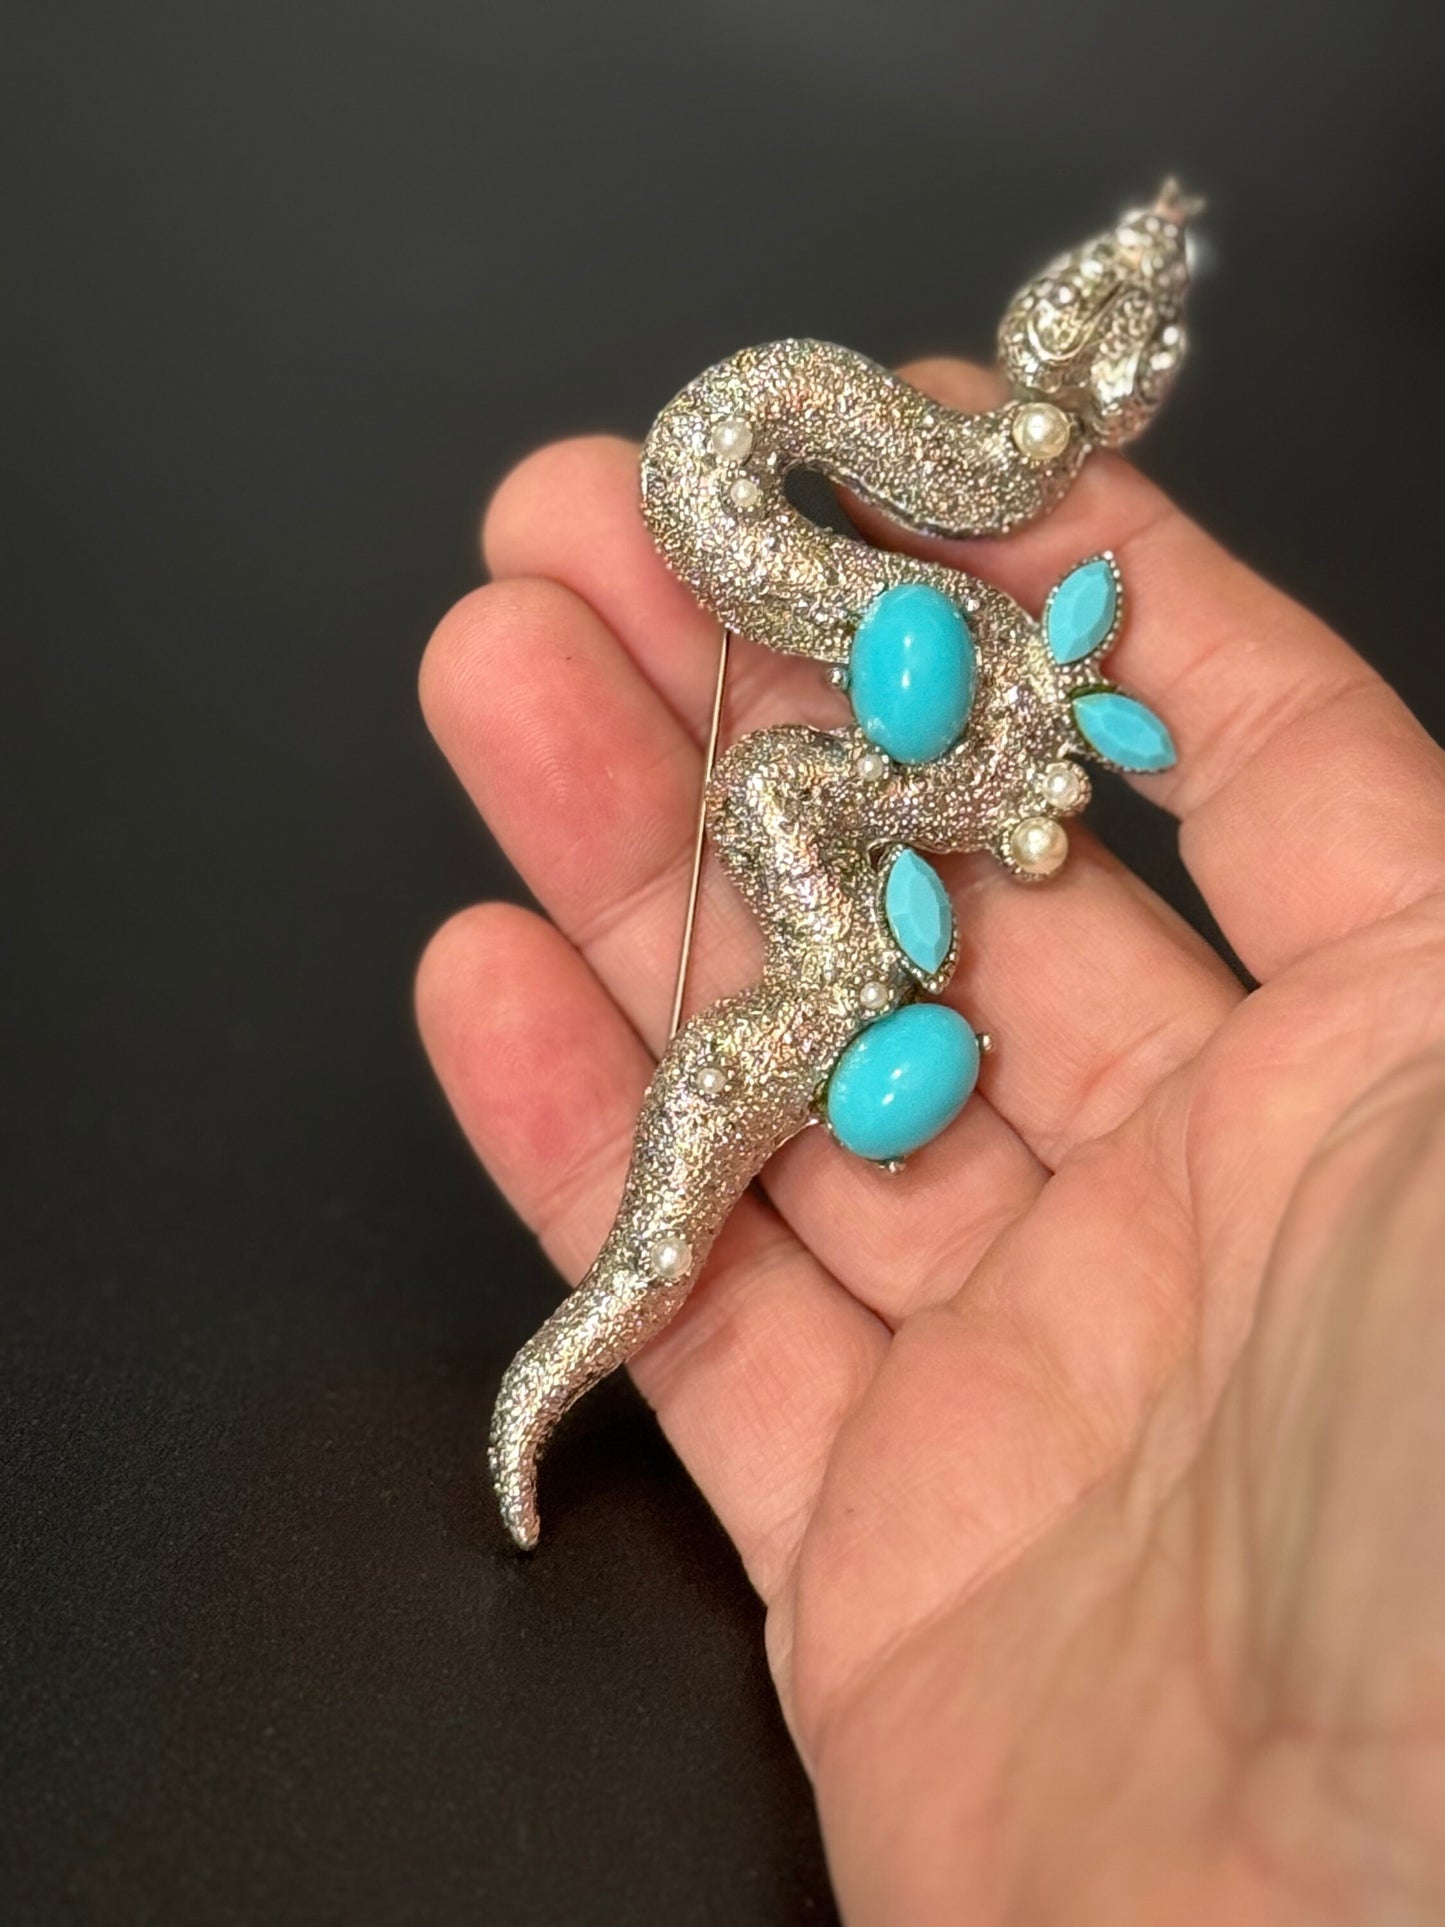 True vintage 12cm large silver tone snake brooch set with faux turquoise and pearls old shop stock